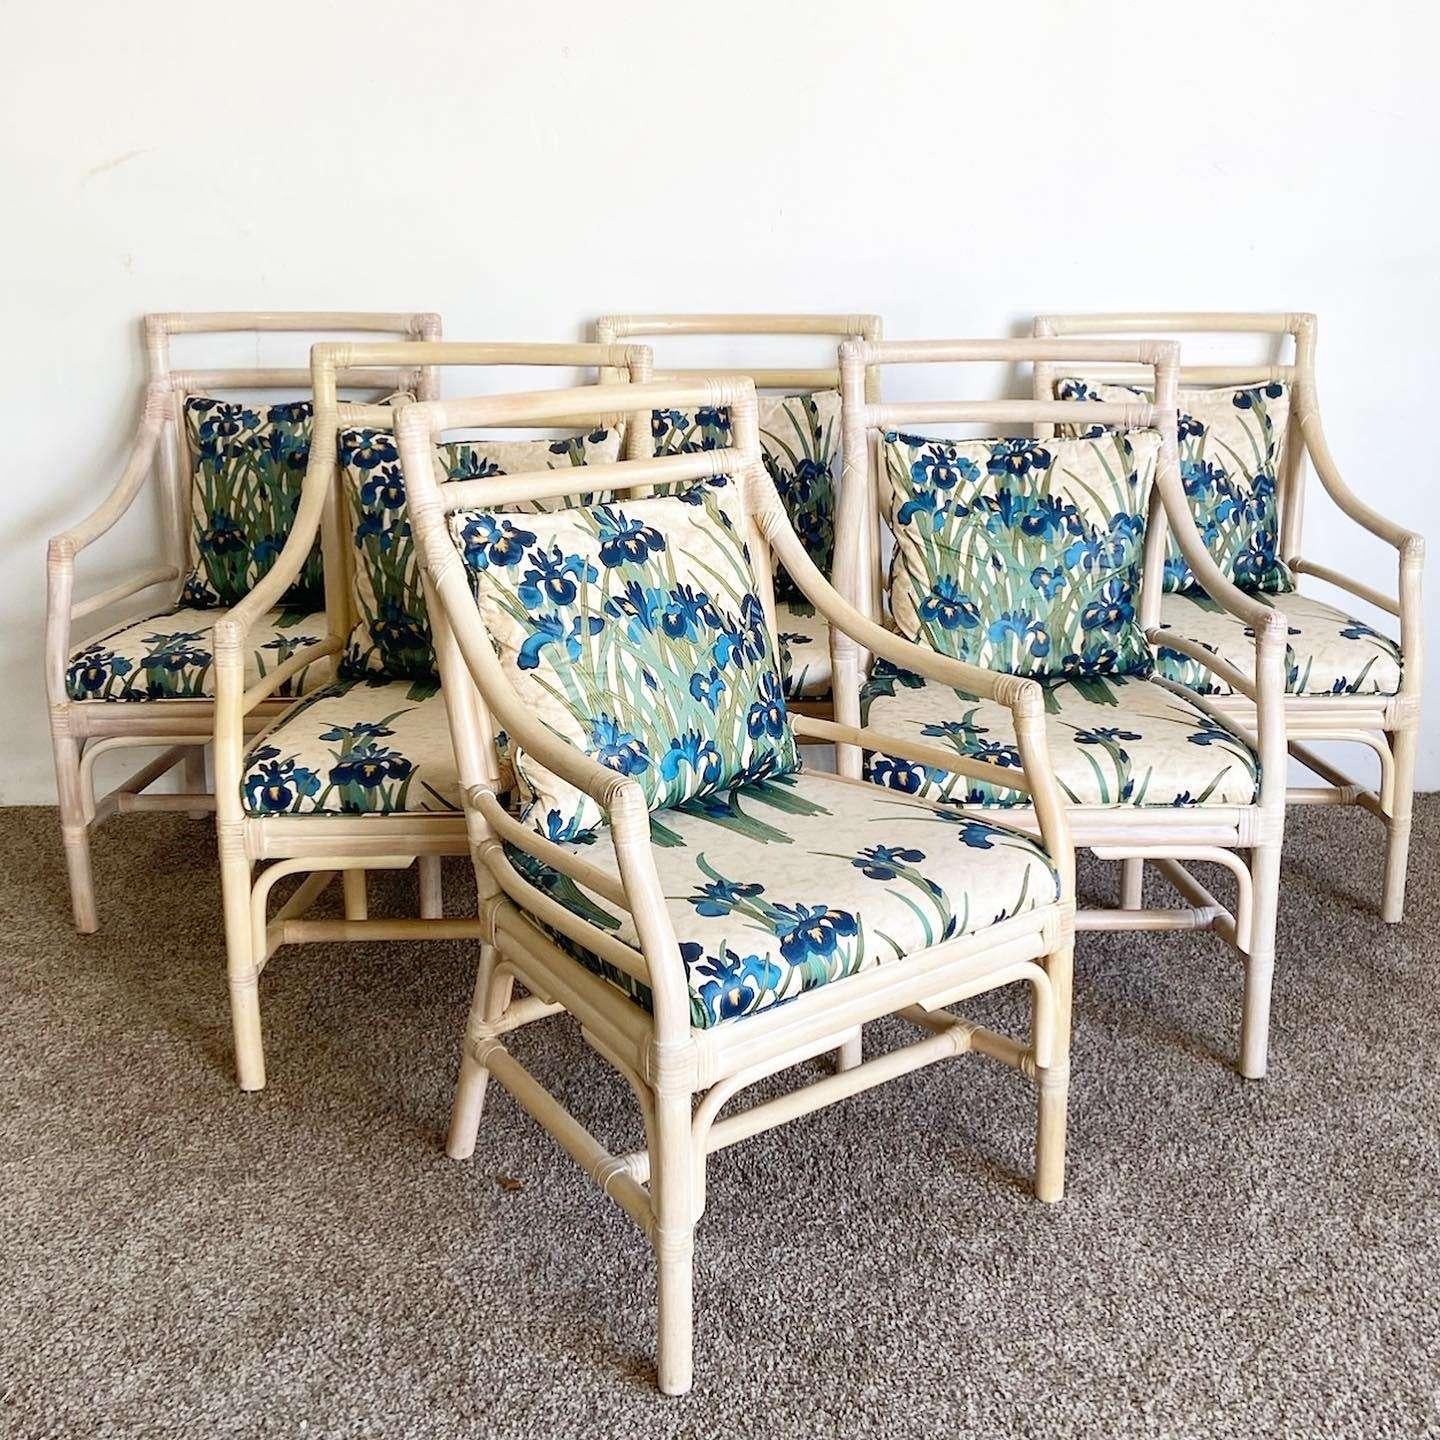 Philippine Bohemian McGuire Target Style Rattan Bamboo Dining Side Armchairs - Set of 6 For Sale